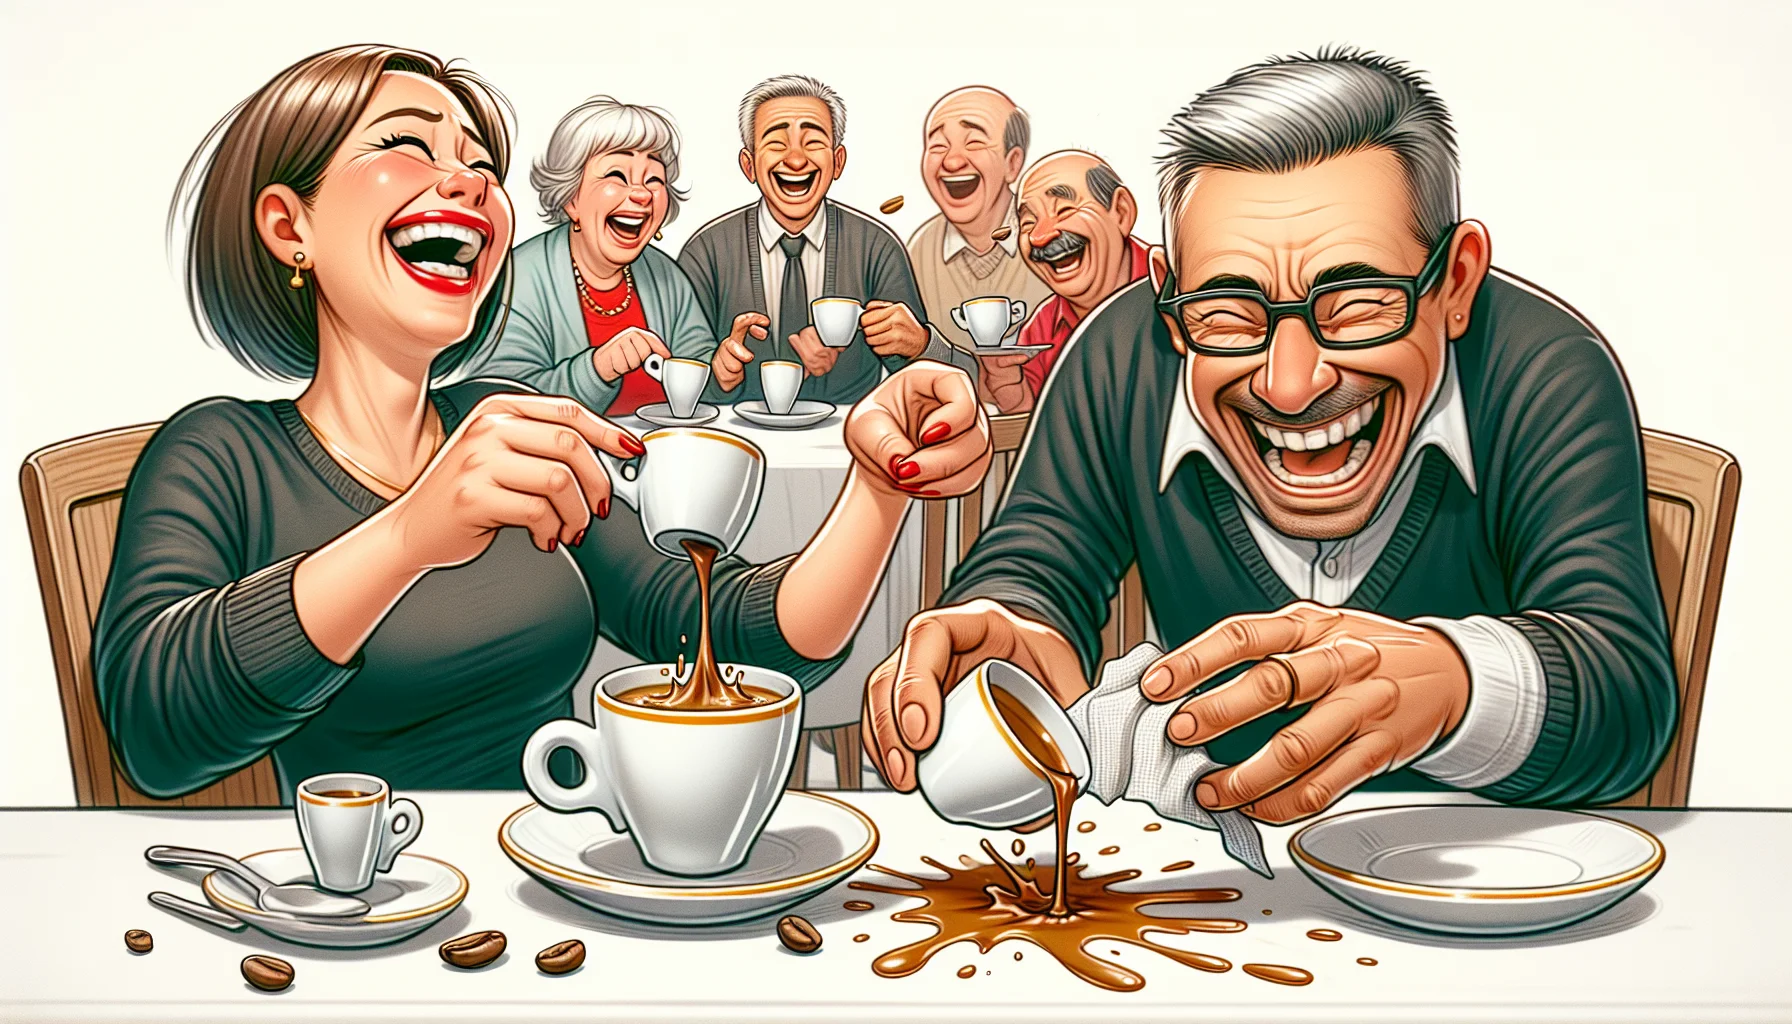 Draw a humorous scene featuring an espresso cup set. A Caucasian adult woman is laughing while clumsily spilling some espresso from her tiny cup onto the clean, white tablecloth. Next to her, a Black adult man is chuckling and holding a napkin, preparing to clean the mess. In the background, there's a Hispanic senior man laughing heartily and holding a steaming espresso cup. The espresso cups are porcelain-white with golden rims, and the espresso inside them is a deep, rich shade of brown. The overall atmosphere is inviting and full of fun, encouraging other people to join and enjoy this engaging, coffee-filled moment.